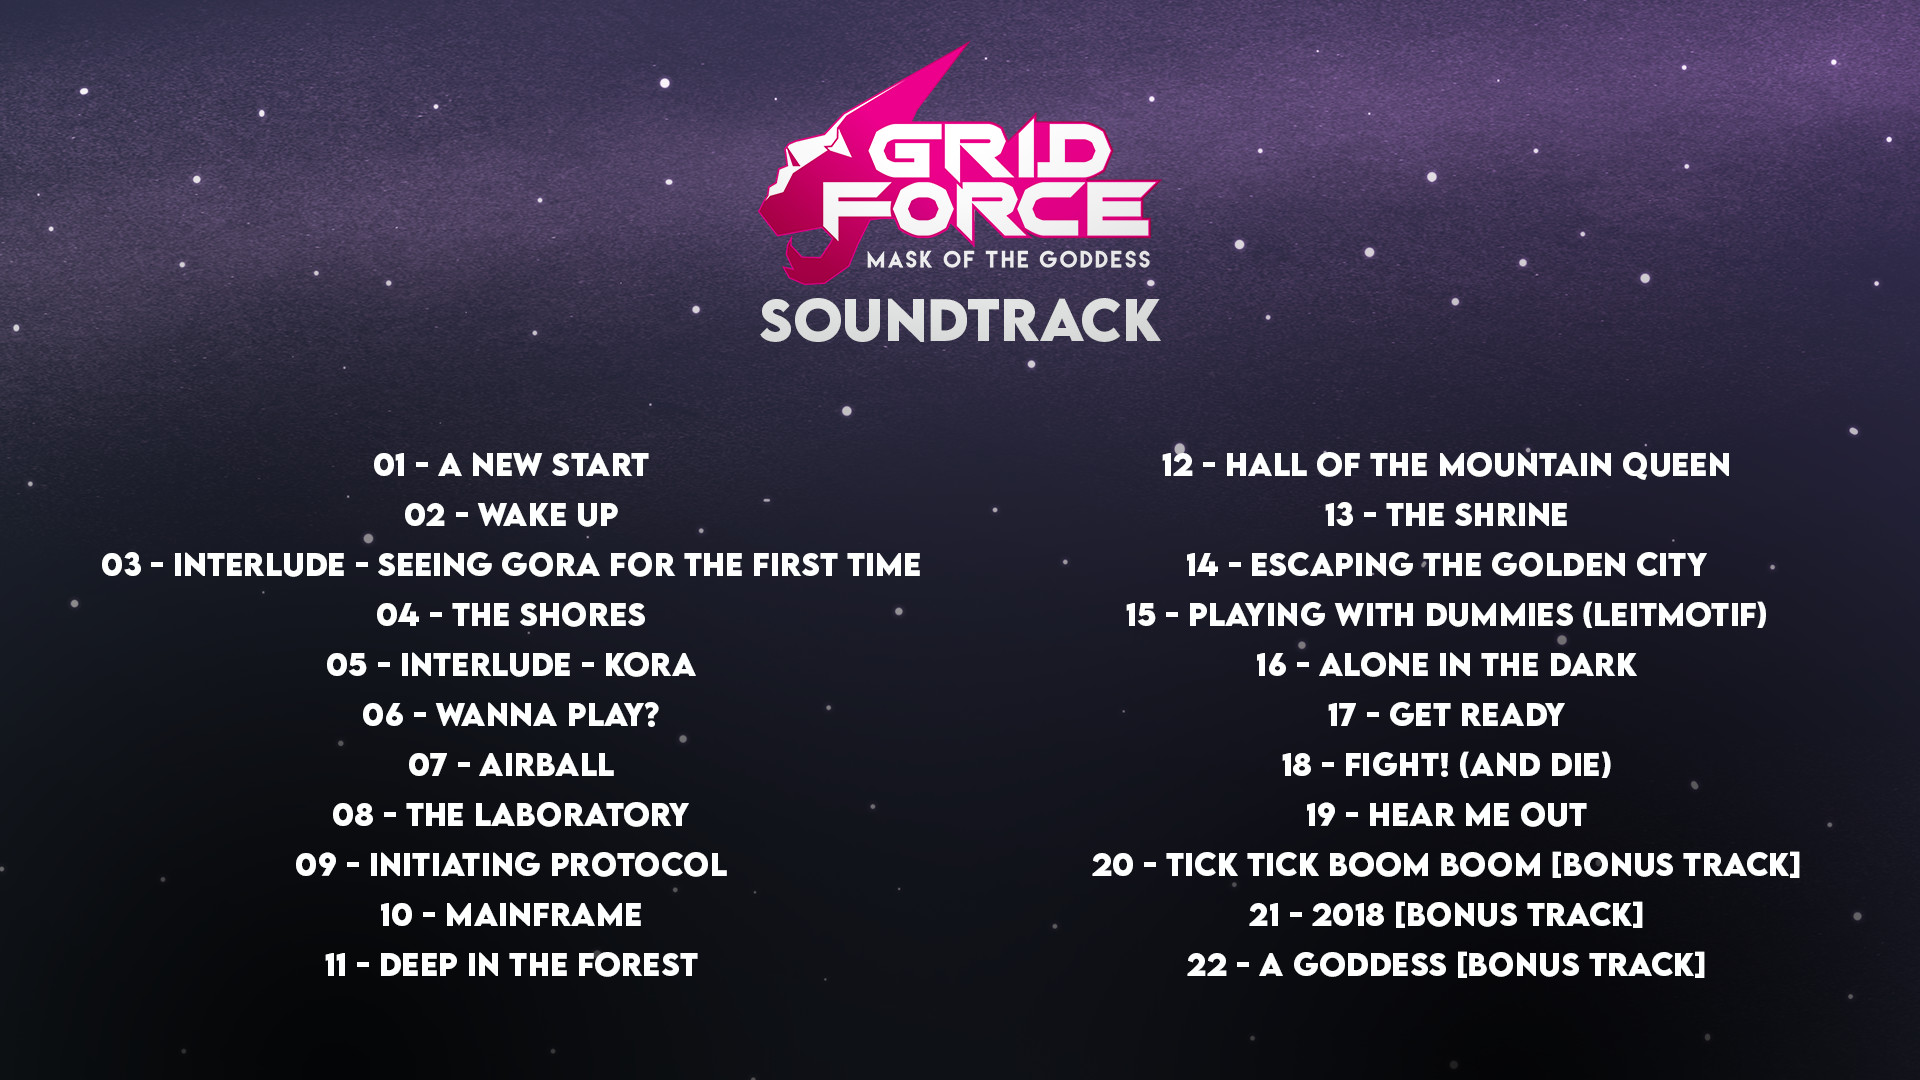 Grid Force - Mask of the Goddess Soundtrack Featured Screenshot #1